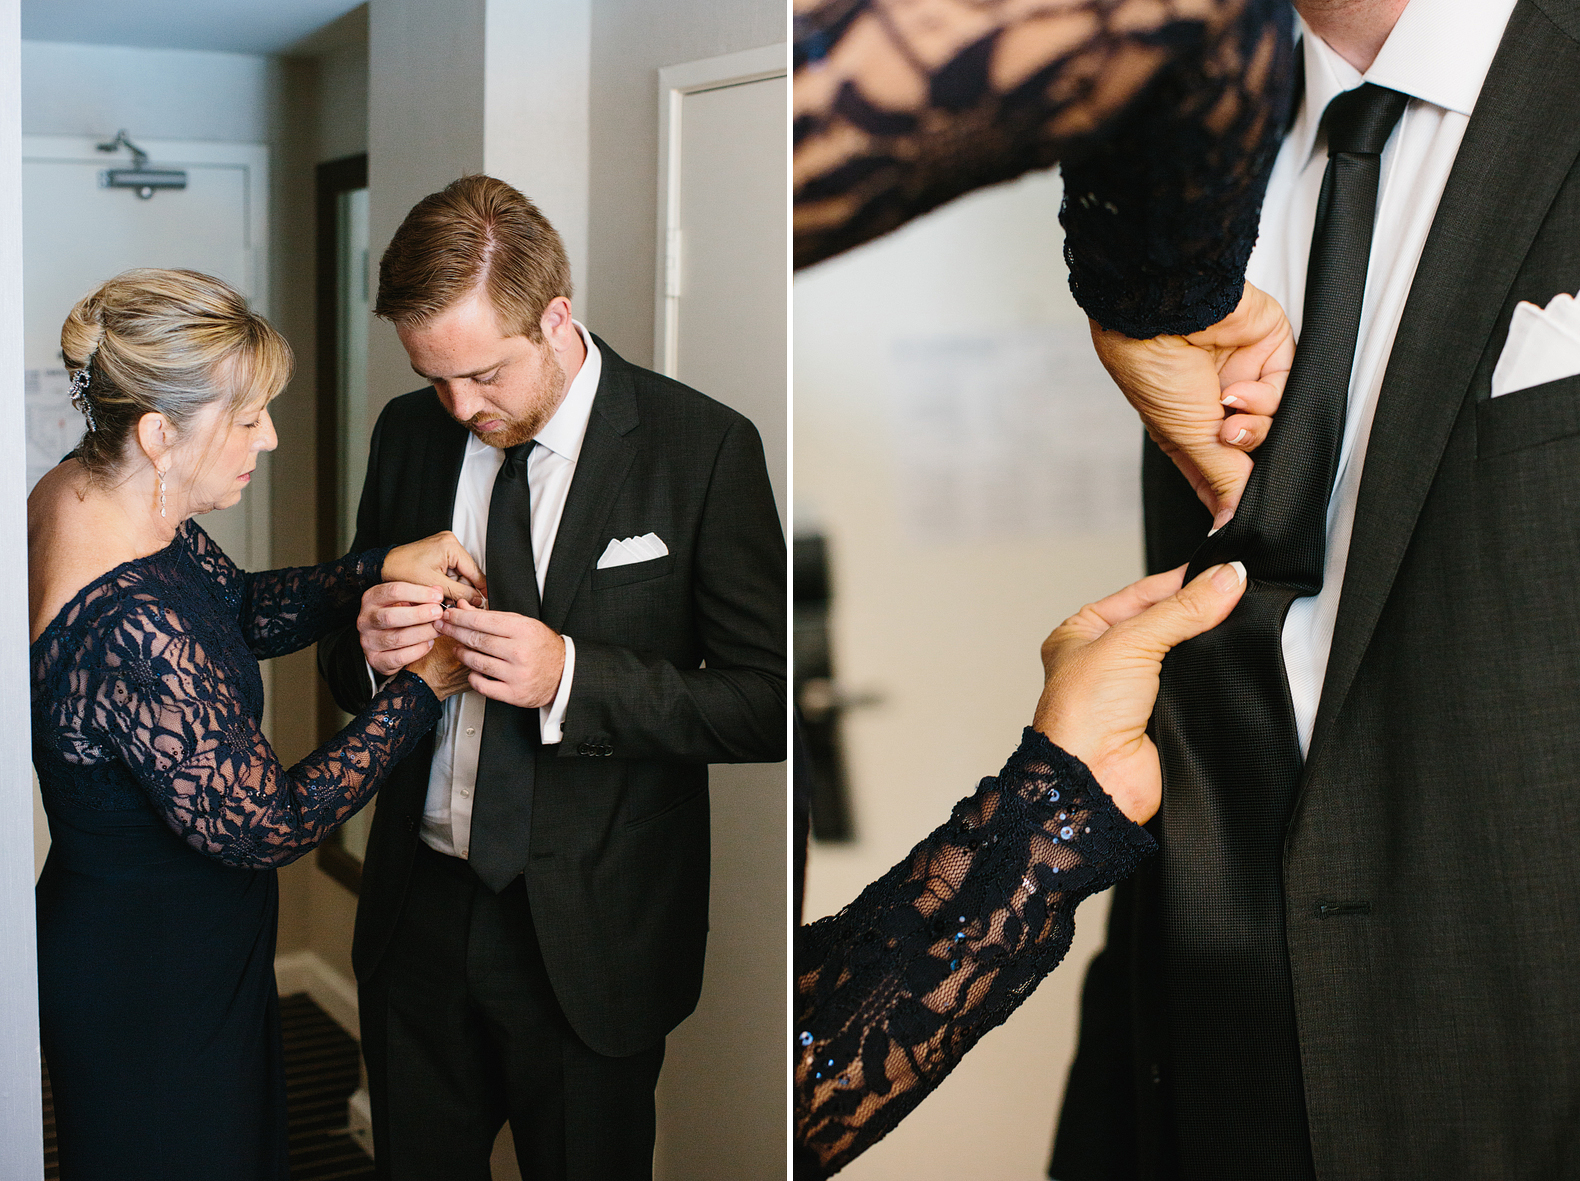 This is Matt's mom helping him with his tie.